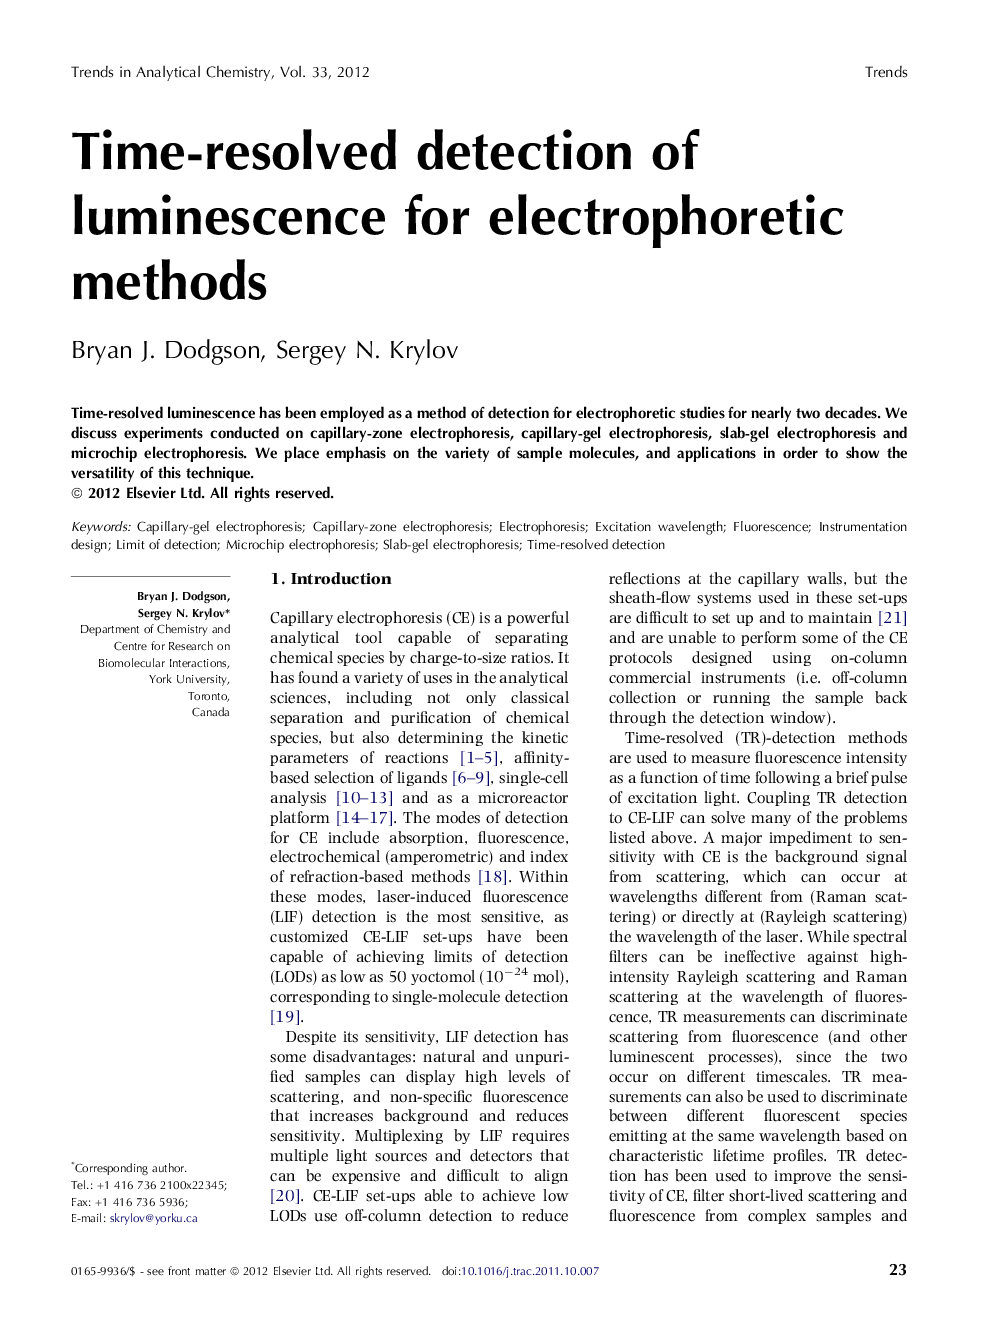 Time-resolved detection of luminescence for electrophoretic methods